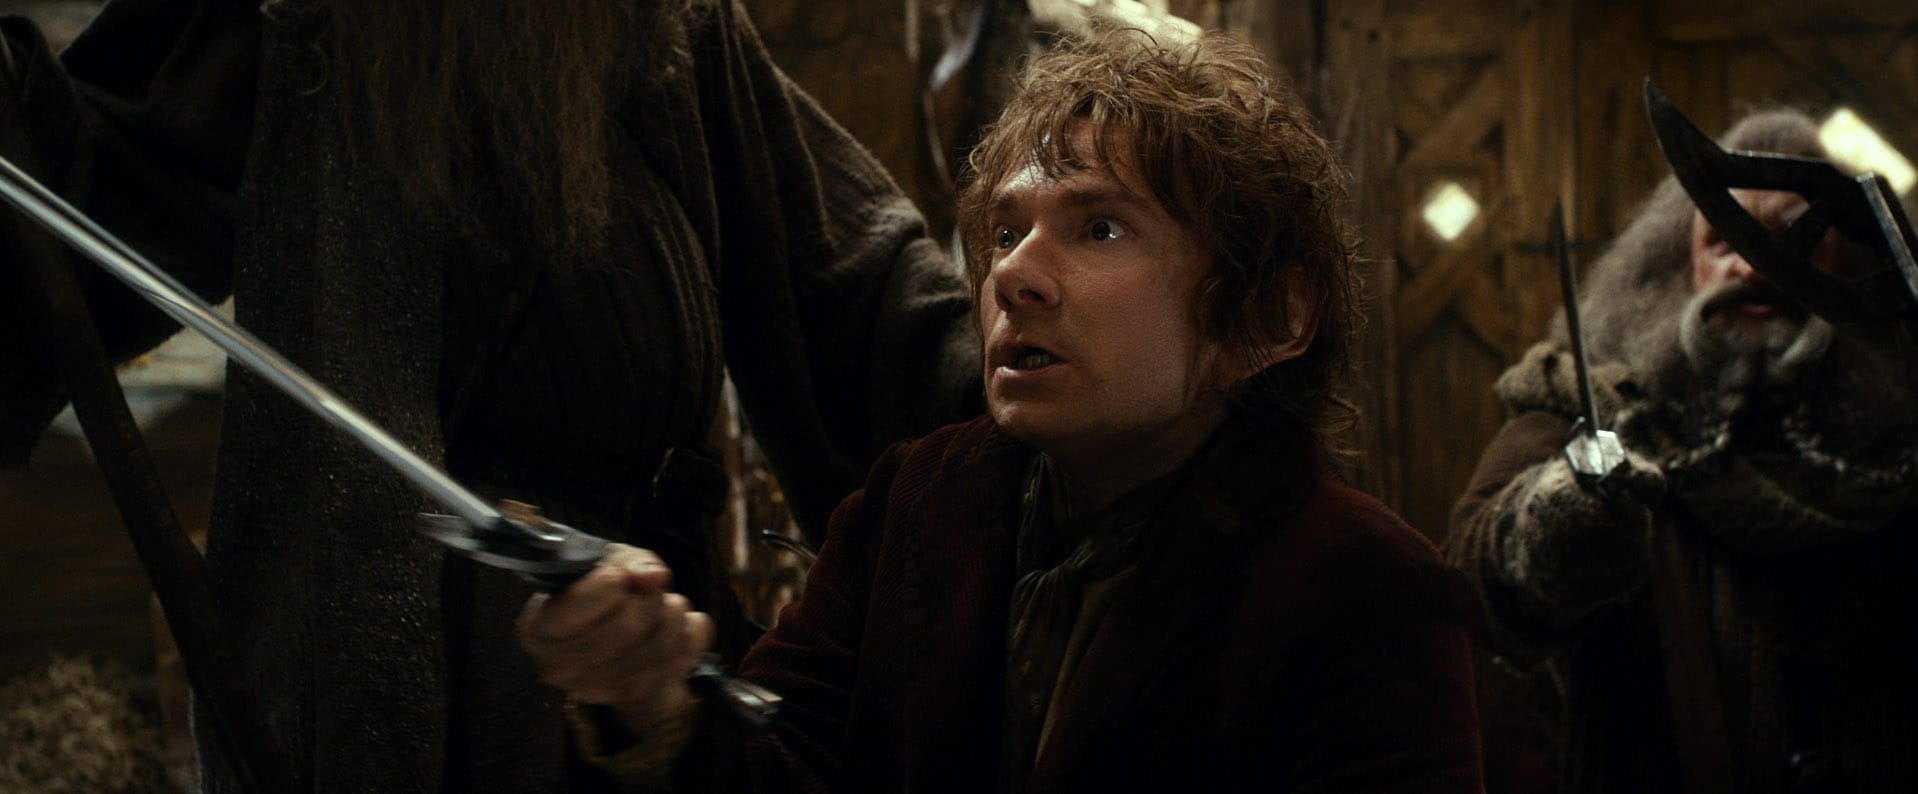 film, film news, movie news, movie trailers, movies, peter jackson, the hobbit, The Hobbit: Desloation of Smaug, trailers